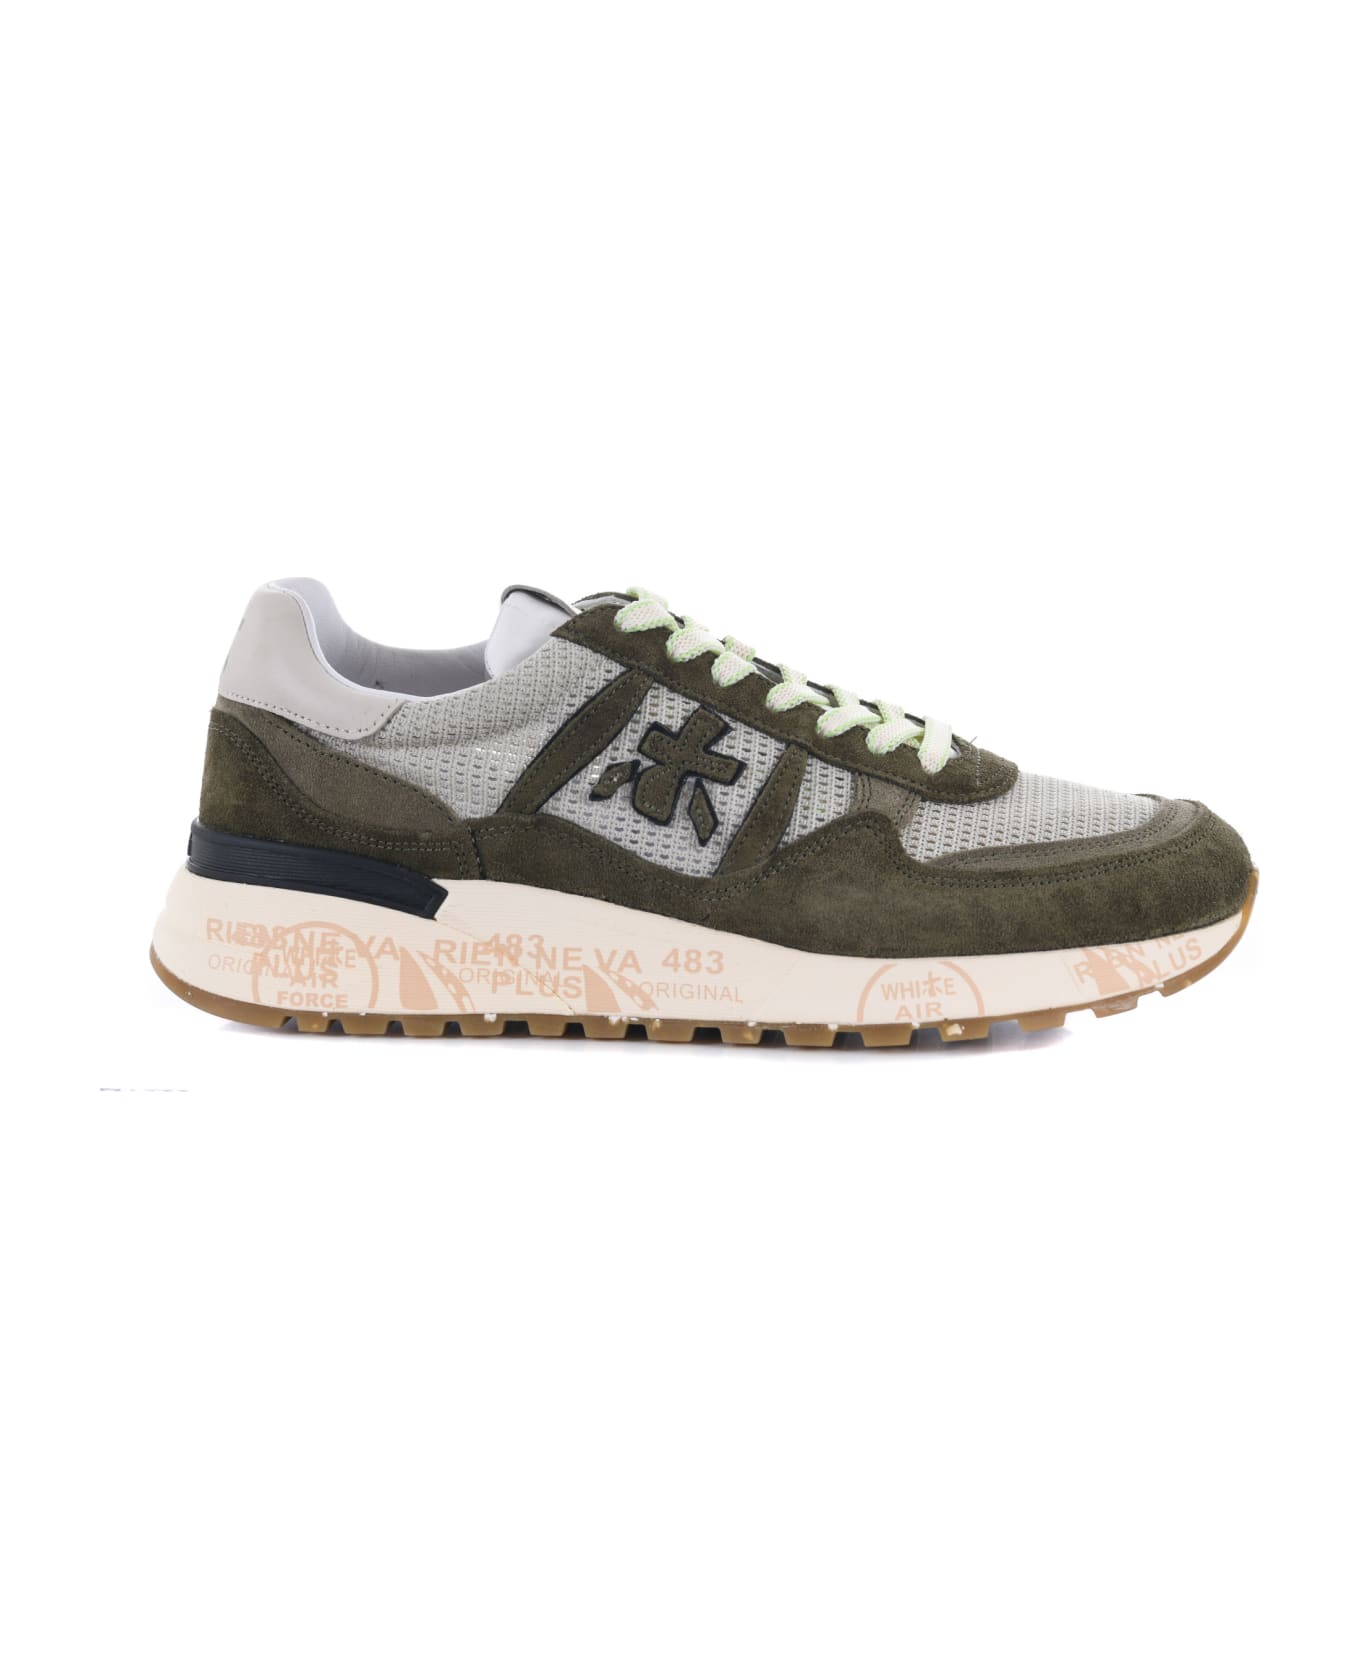 Premiata Sneakers In Suede And Perforated Mesh - Verde militare スニーカー